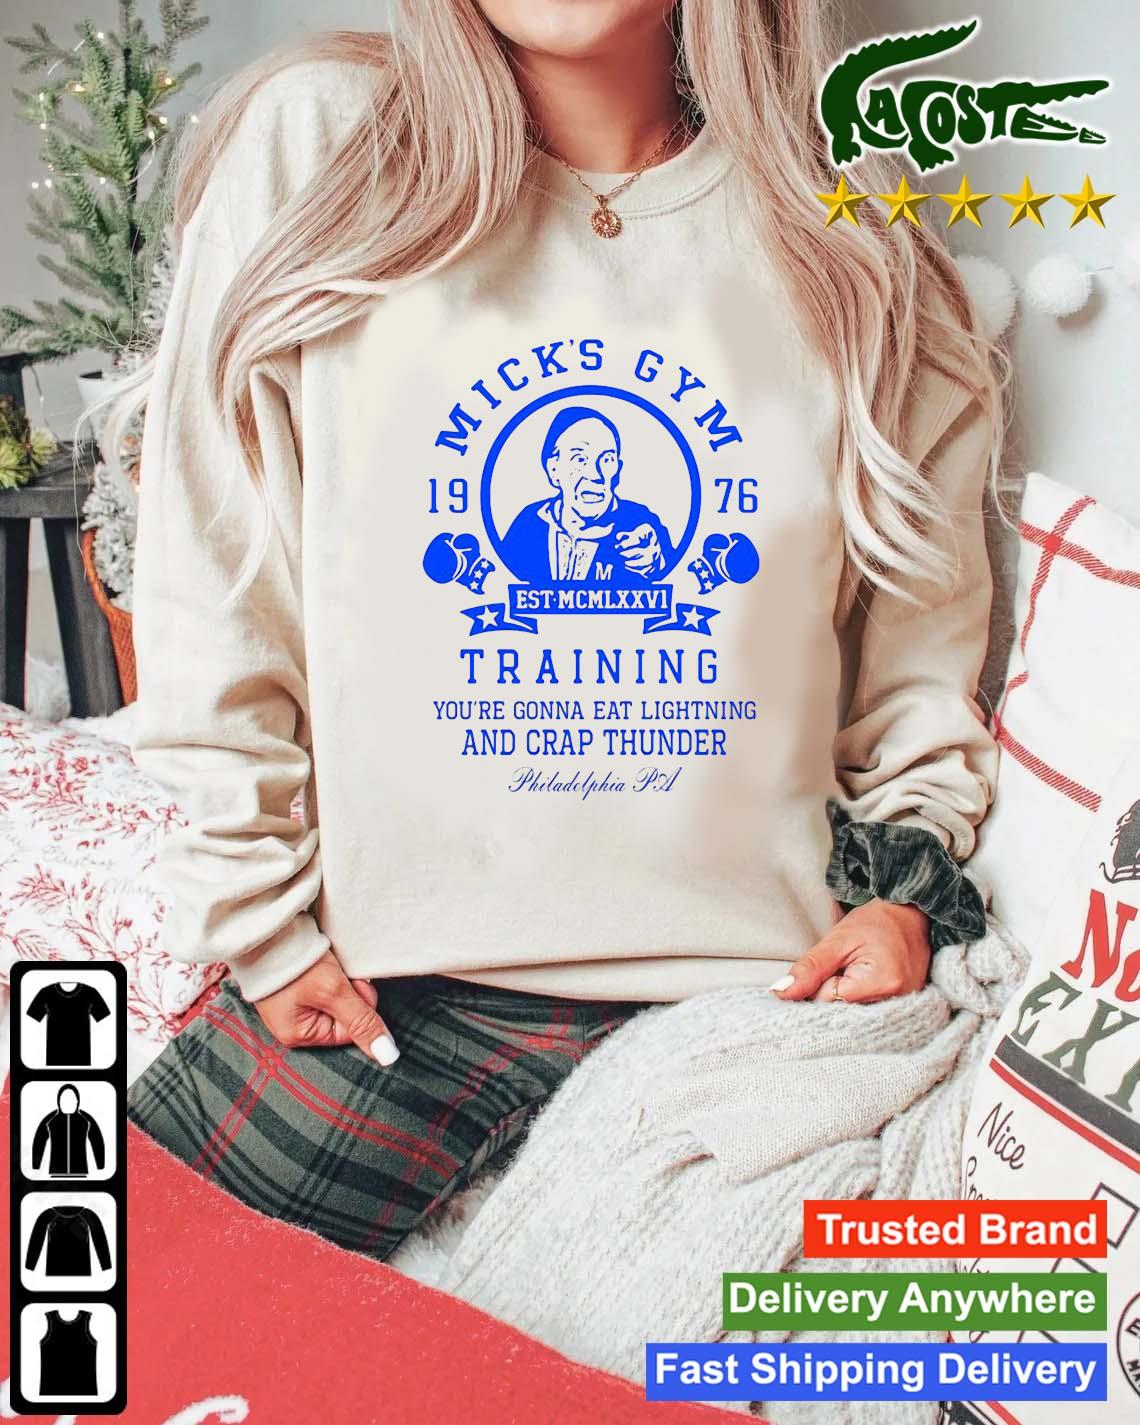 Micky Gym Boxer Training You're Gonna Eat Lightning And Grap Thunder 1976 Sweats Mockup Sweater